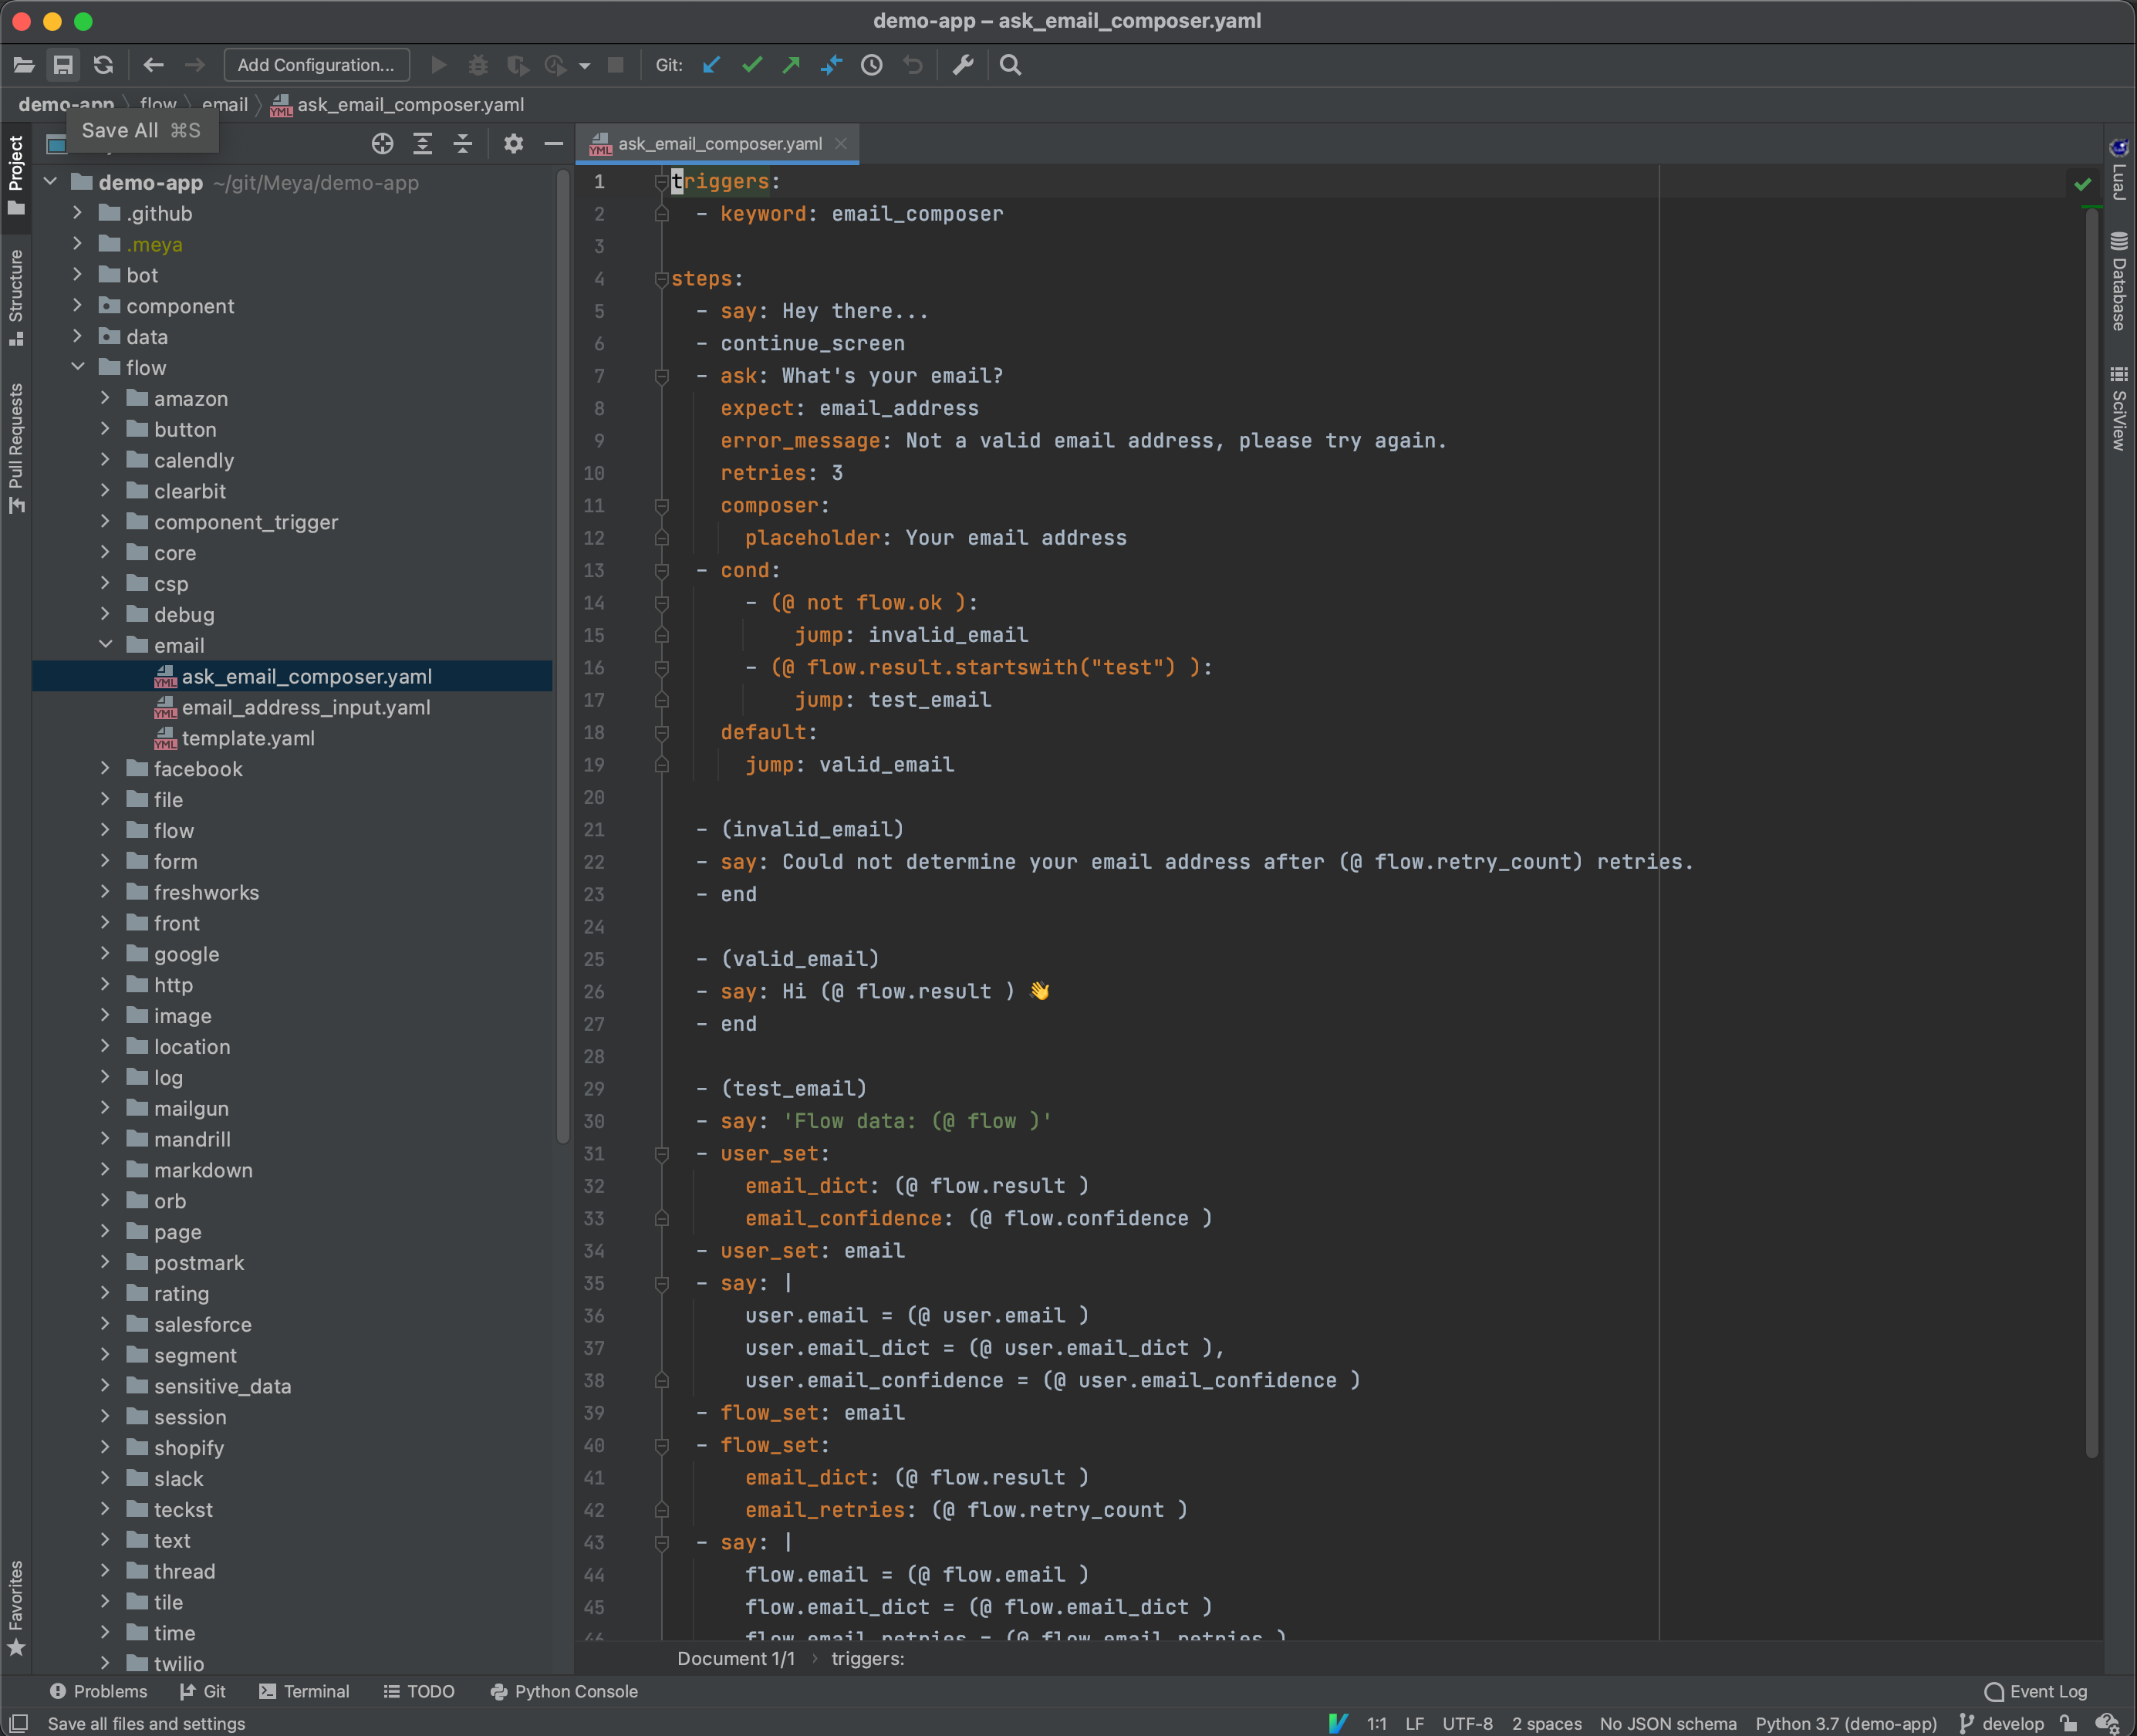 An example of editing the same flow file in the PyCharm IDE.